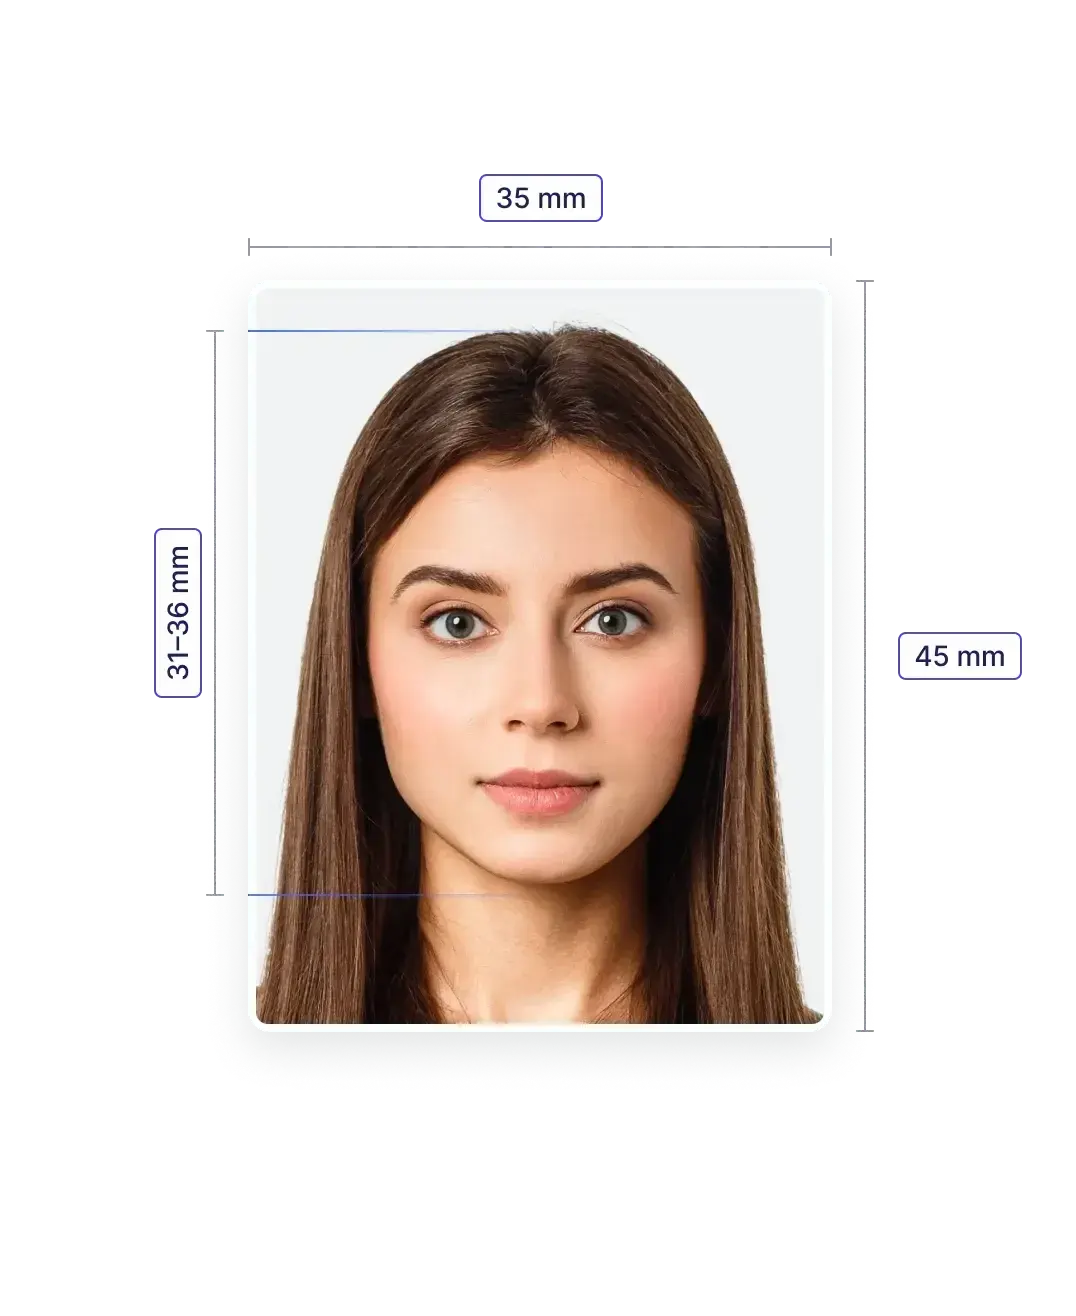 Canadian Visa Photo—Specifications